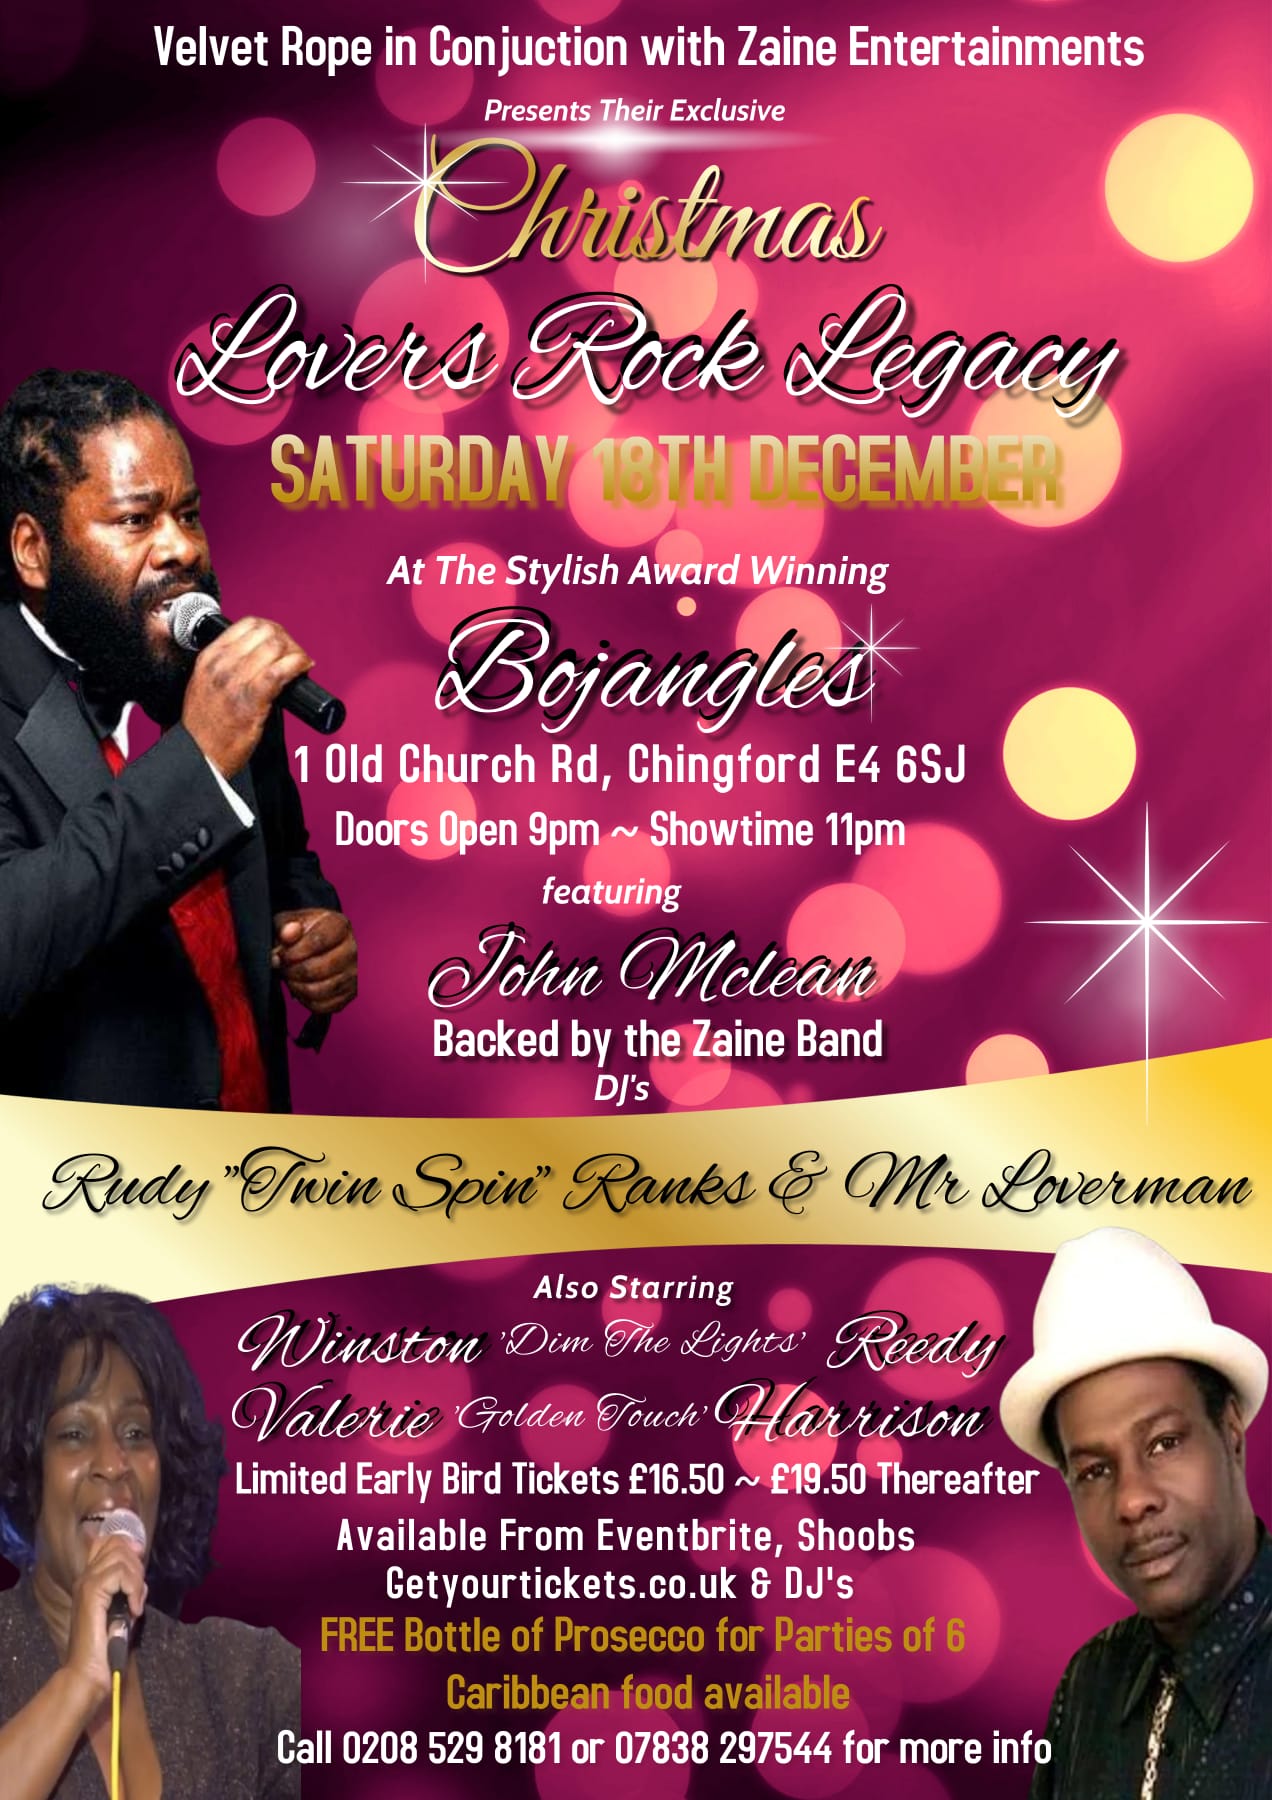 Lovers Rock Party in Chingford - Christmas Lovers Rock Legacy, Chingford, London, United Kingdom